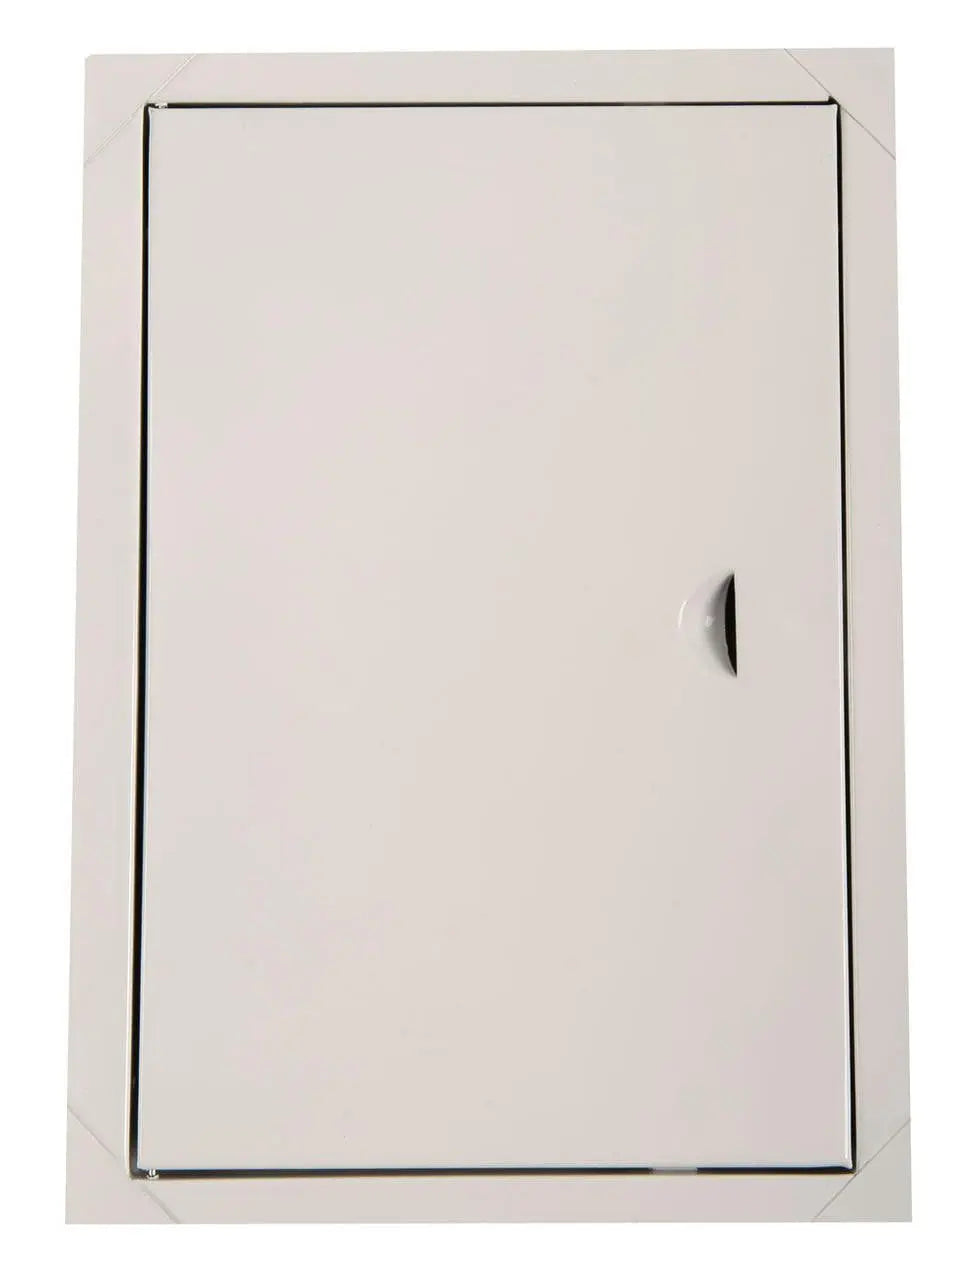 Metal White Access Panels Inspection Hatch Access Doors Inspection Access Panels